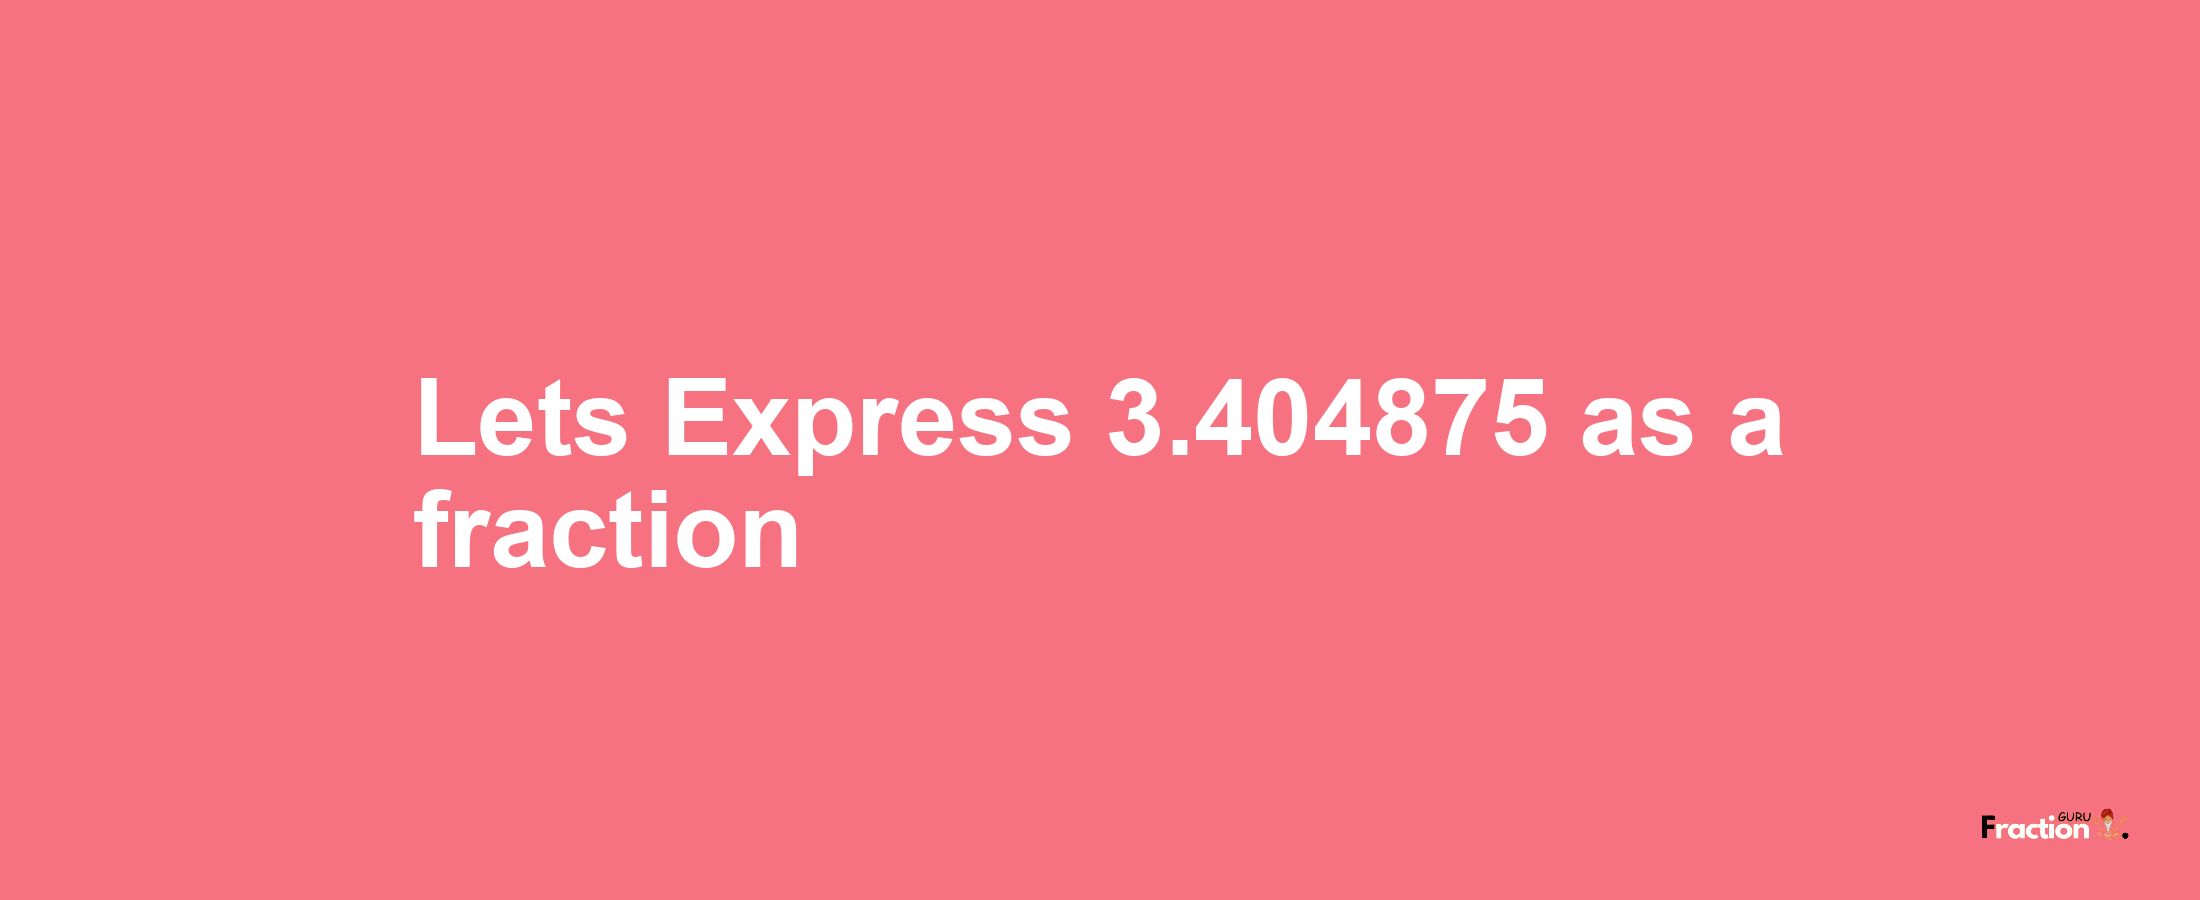 Lets Express 3.404875 as afraction